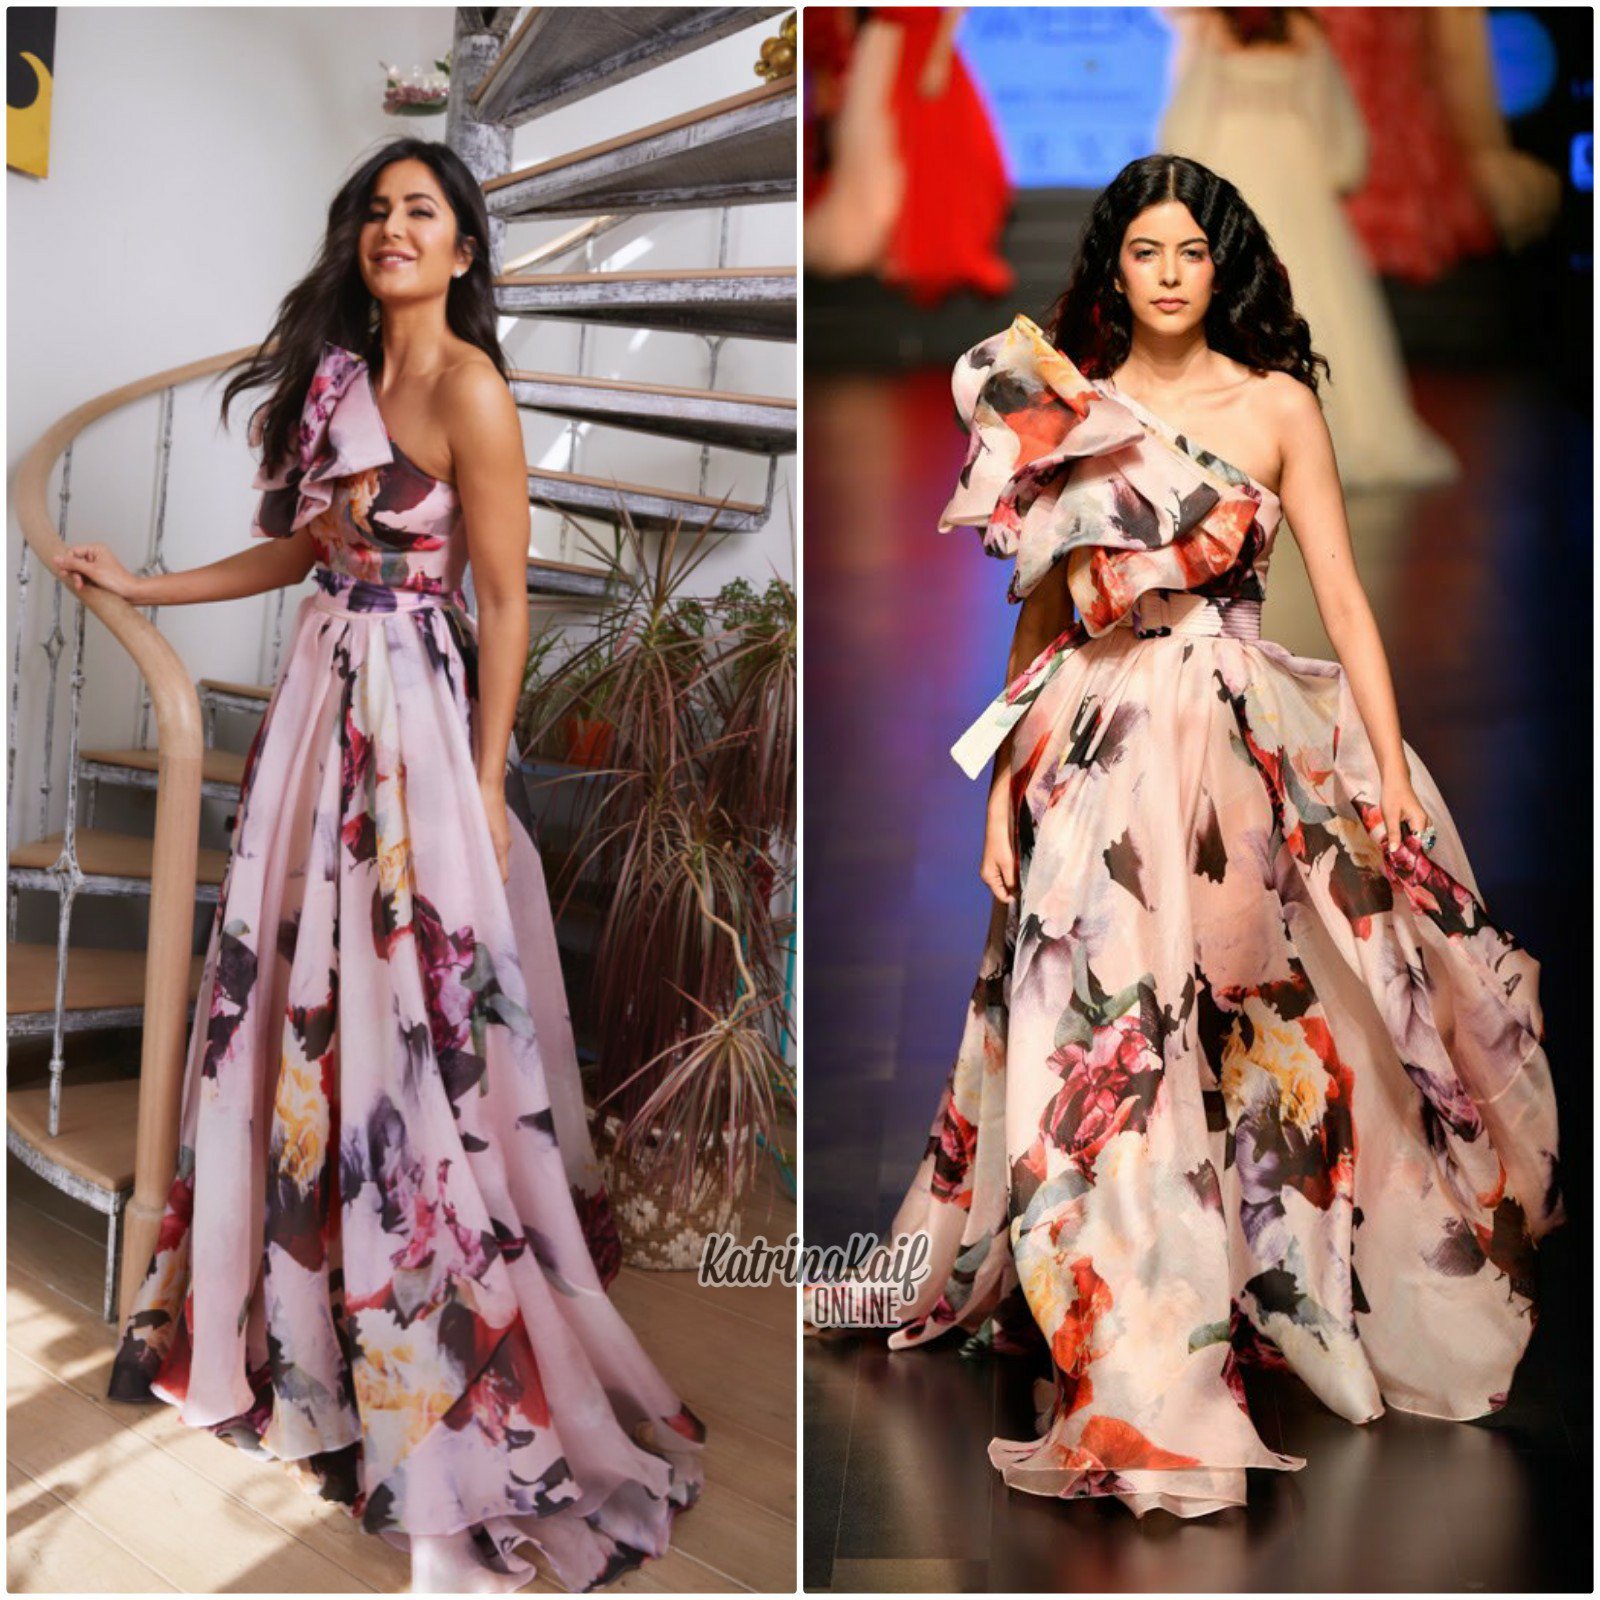 Katrina Kaif's drape front crepe gown comes with a hefty price tag